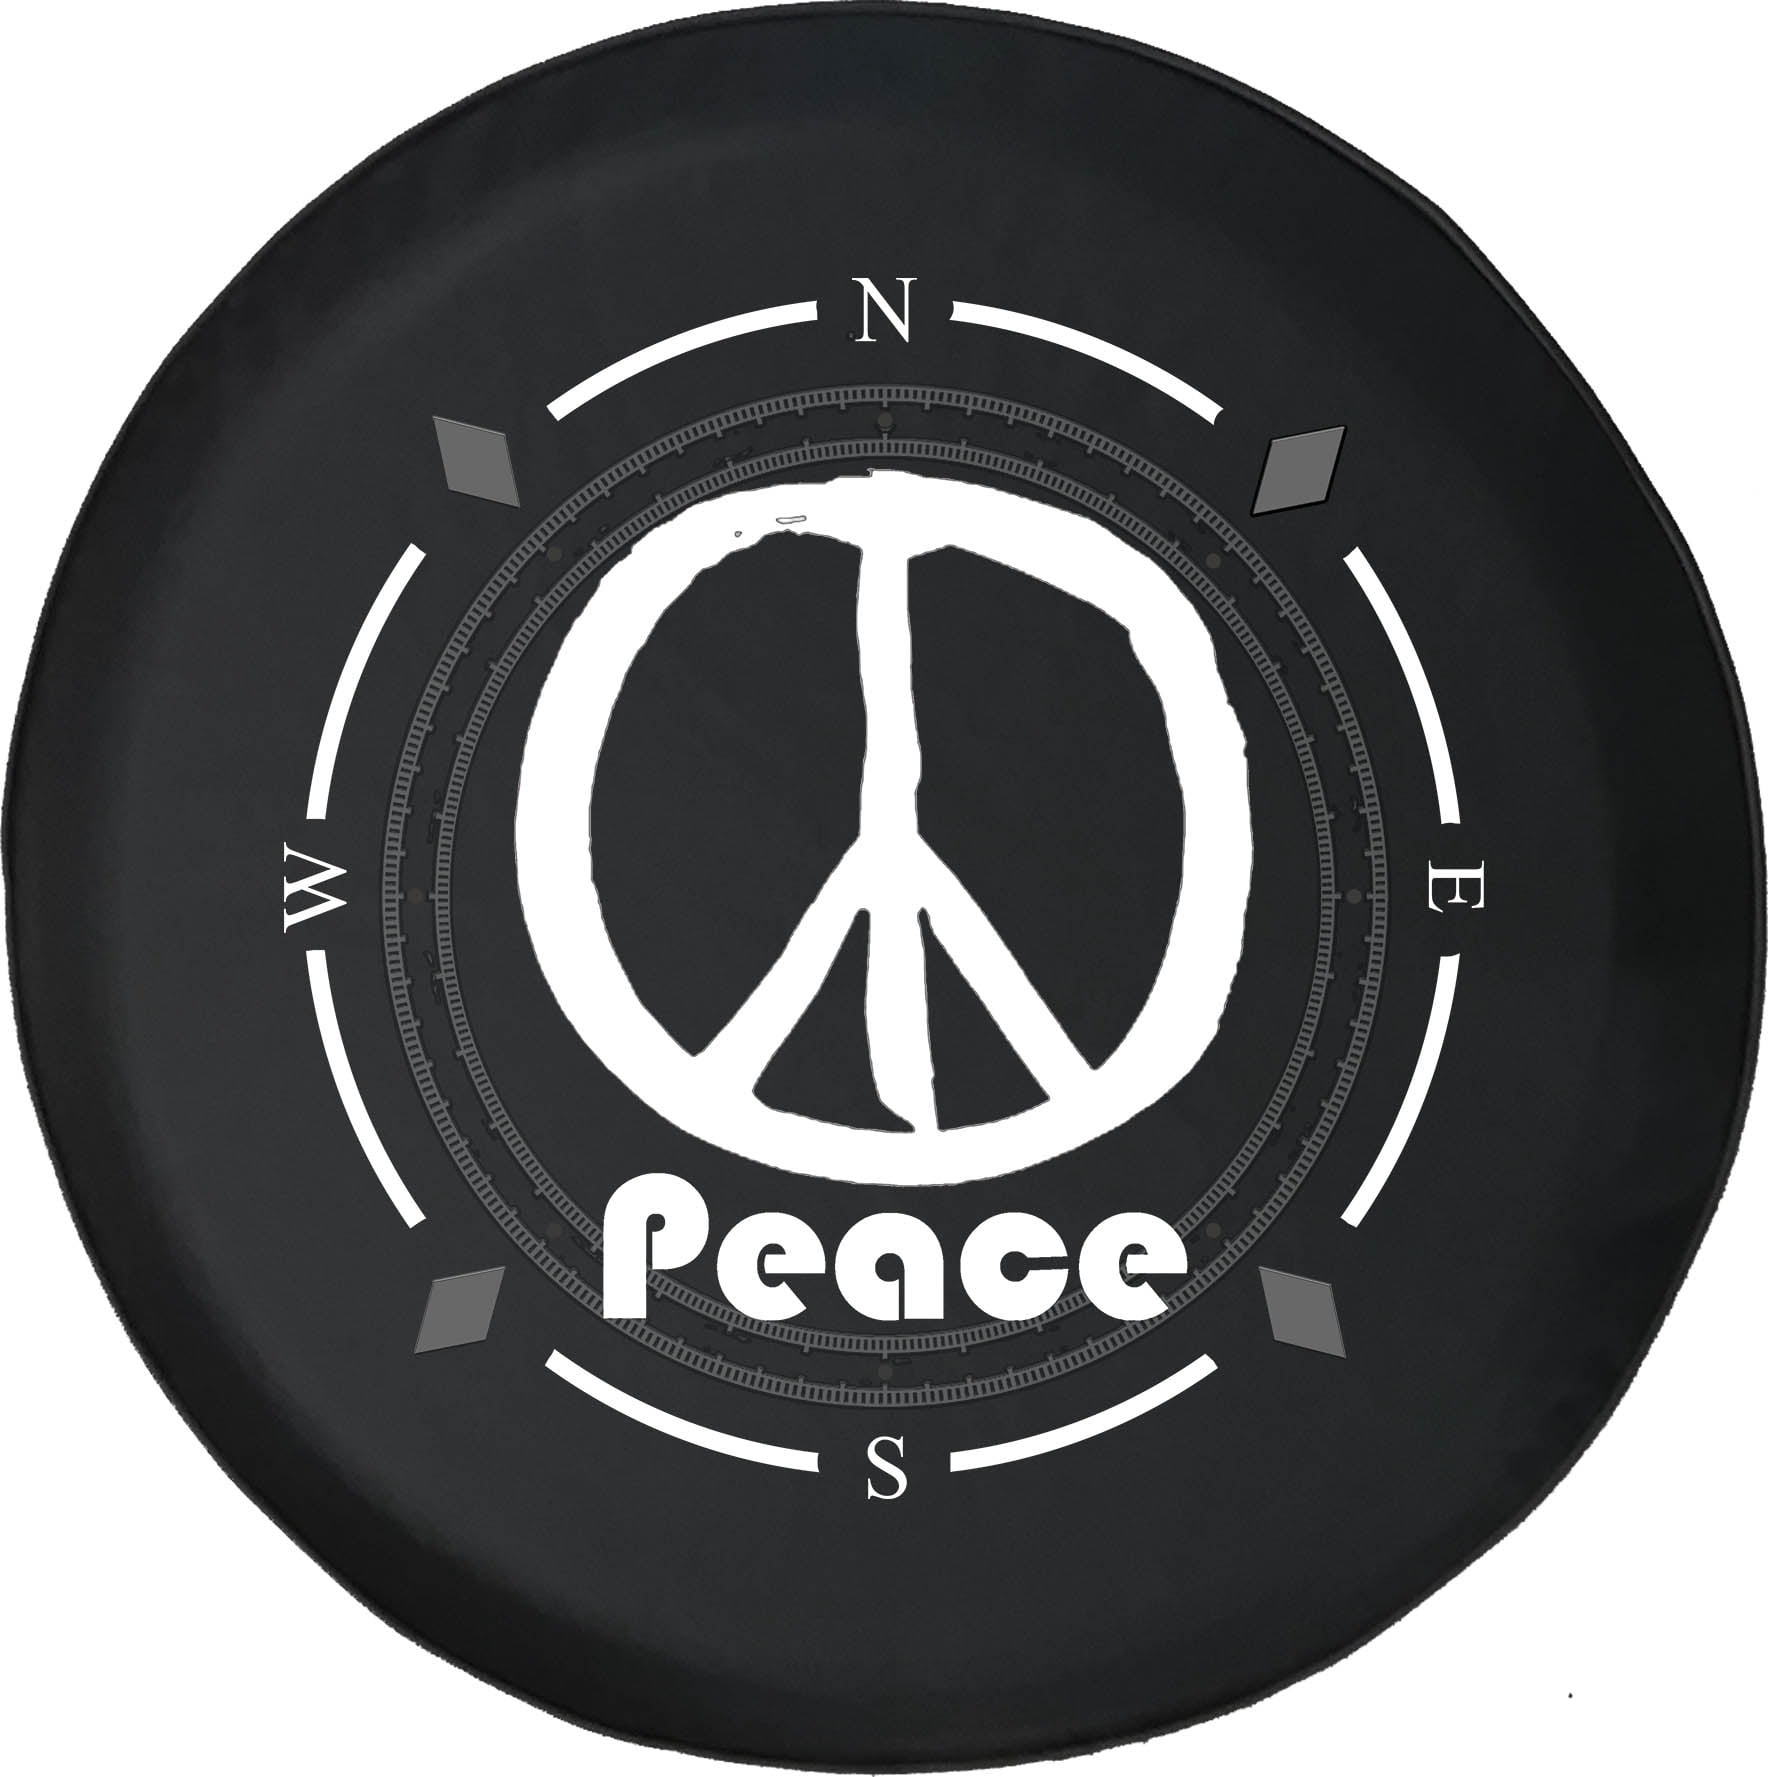 Swono Peace Tire Cover,Rainbow Peace Sign with Hand Drawn Text with Lettering On White Background Wheel Cover Universal Fit for Trailer Rv Many Vehicle Wheel Diameter 14